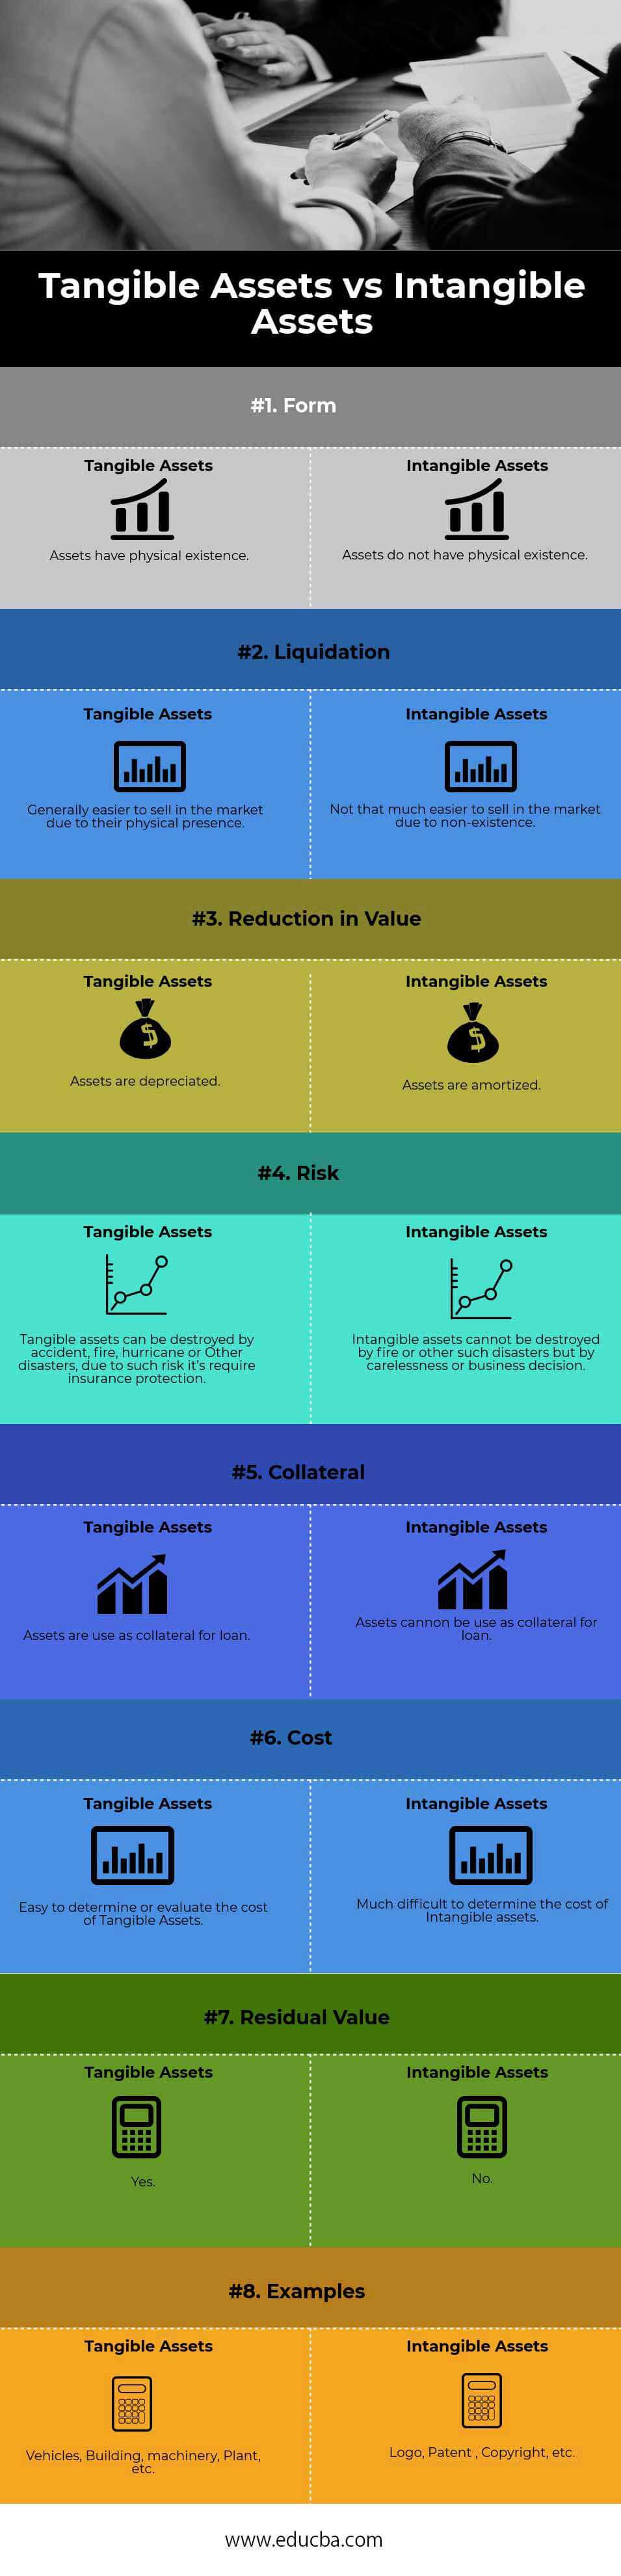 Tangible Assets vs Intangible Assets info